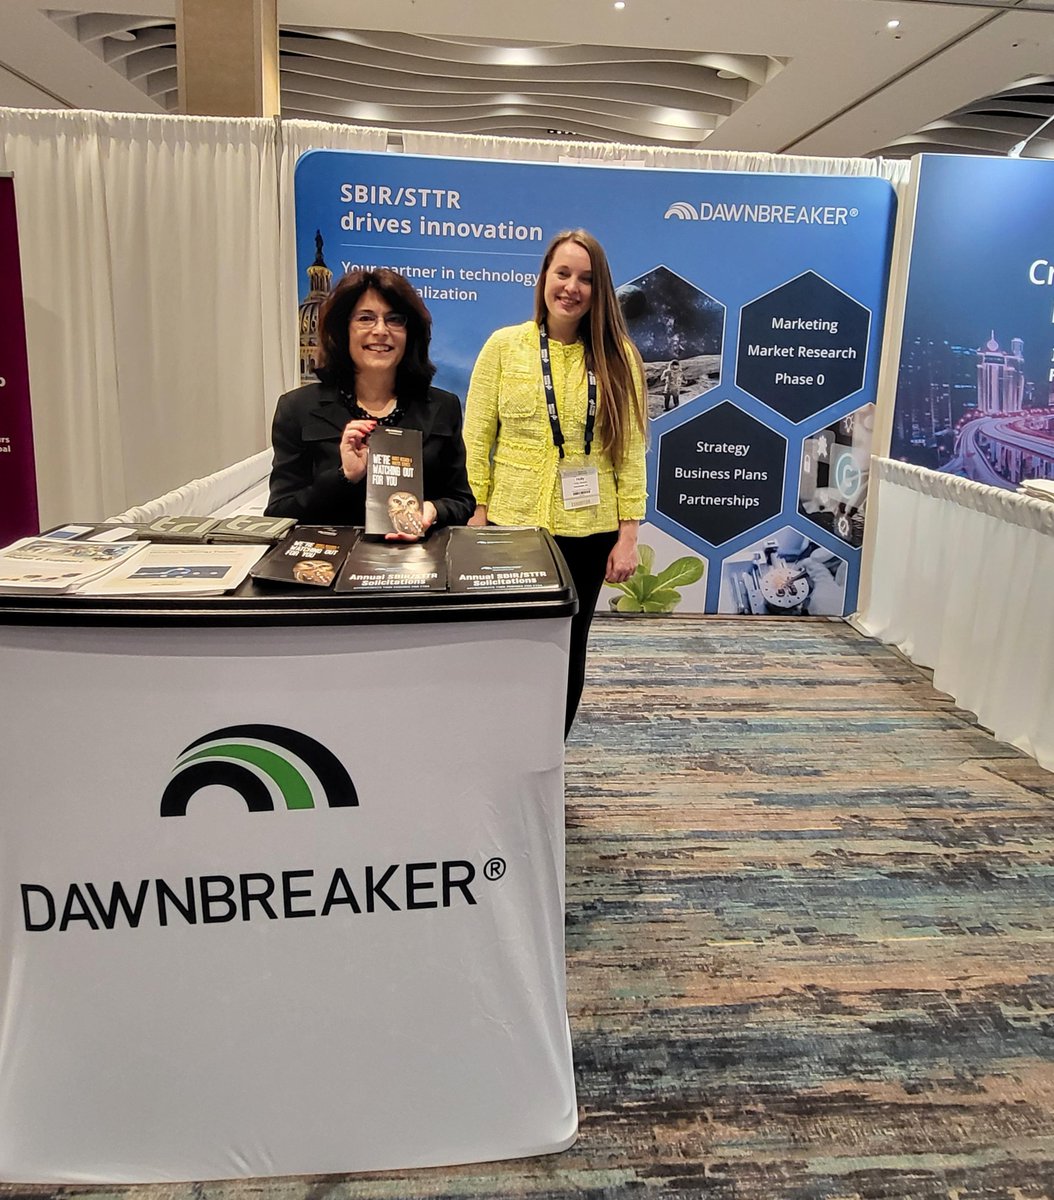 Stop by booth #308 at the @AUTM Annual Meeting in San Diego to learn what @Dawnbreaker, your technology commercialization partner, can do for you!

#TechTransfer #MarketingResearch #DOE #Phase0 #Entrepreneur #SBIR #STTR #TABA #BusinessCoach #MarketingCommunications #IP #Startups